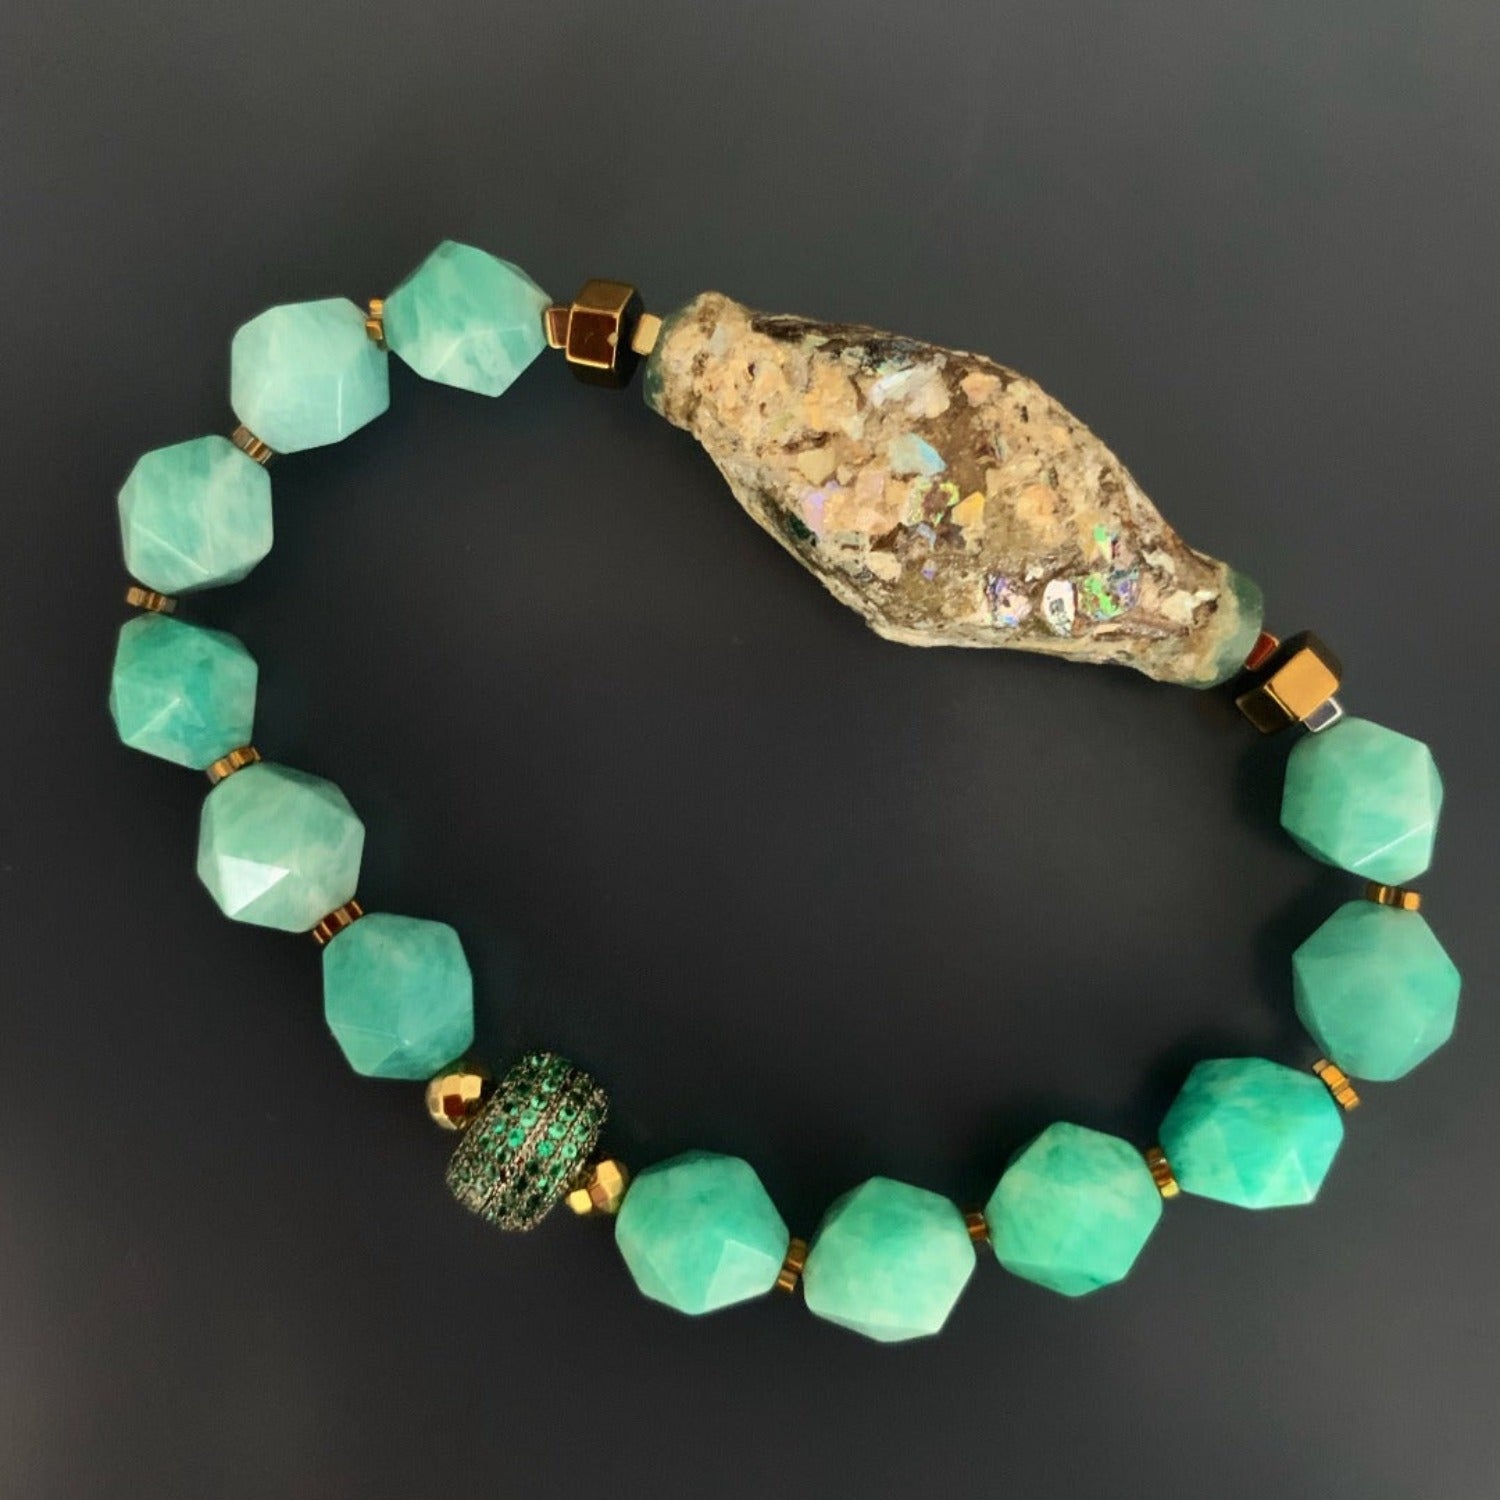 Adorn your wrist with the Historical Bracelet, showcasing the beauty of larimar and the historical multicolor glass bead.